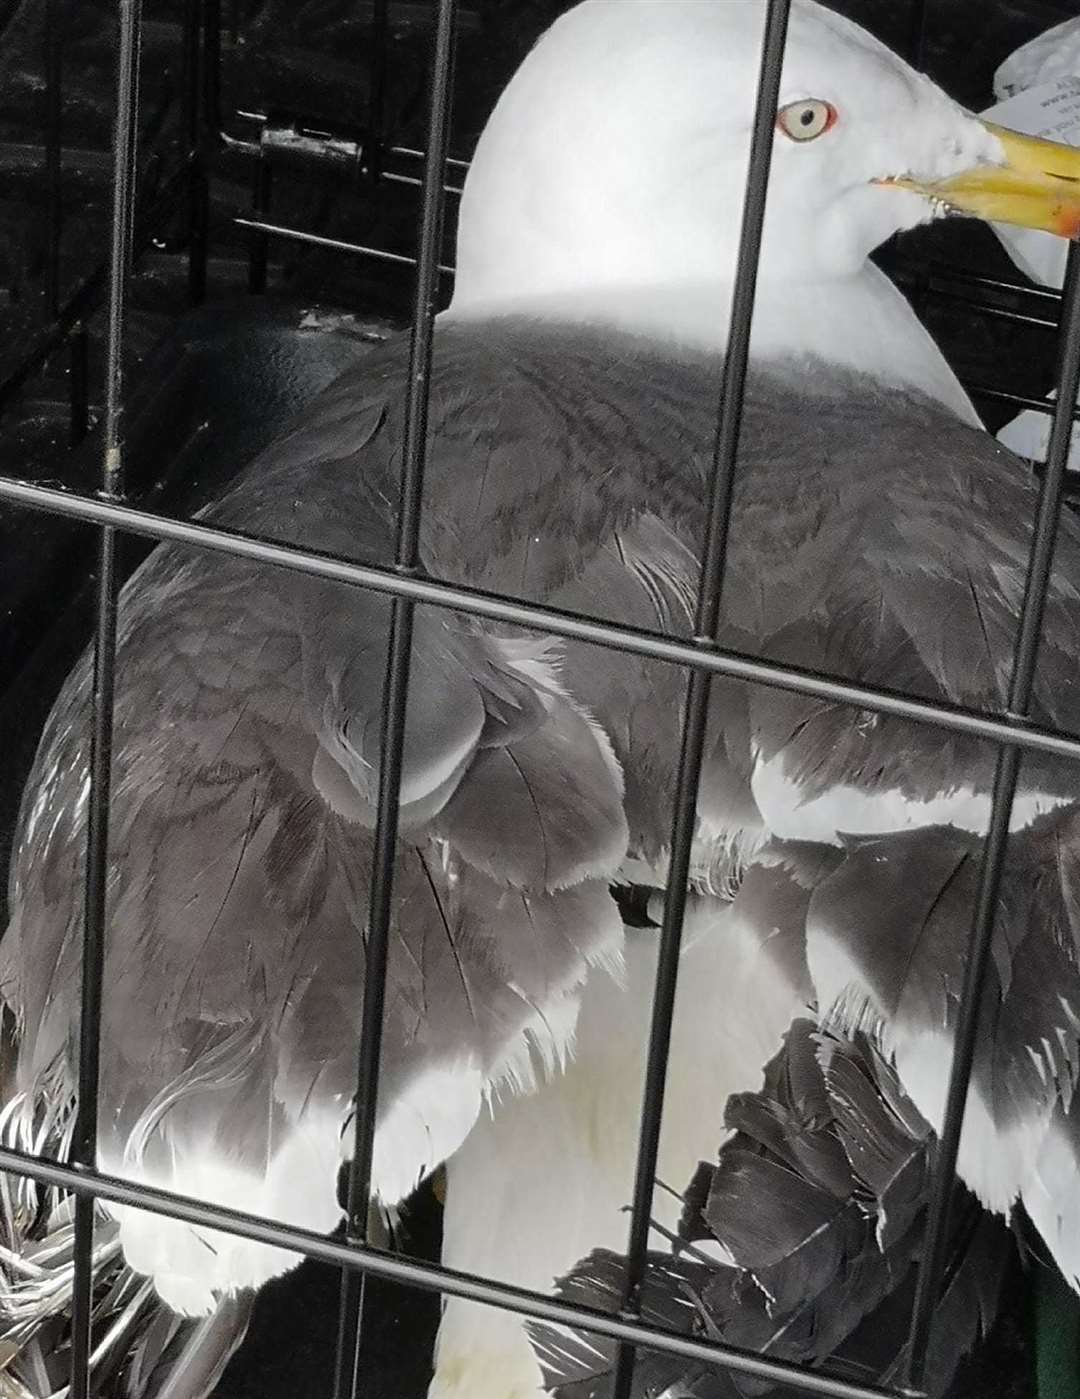 The bird is now being looked after at a rehab facility. Picture: Sheila Stone